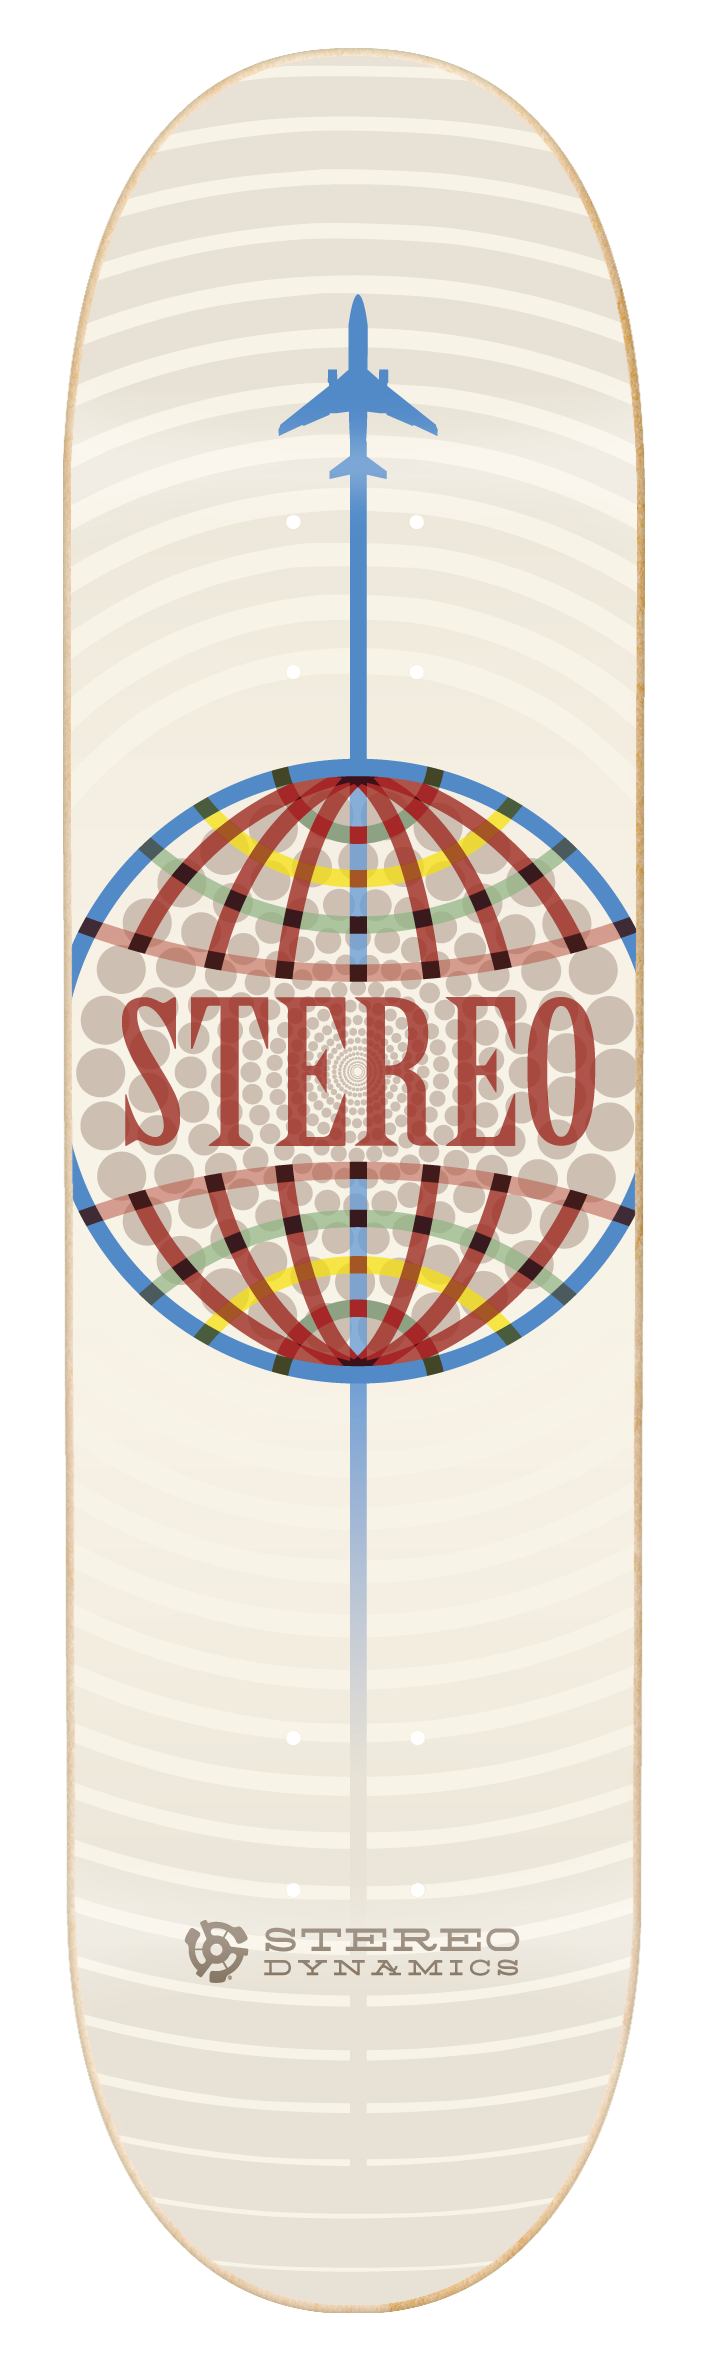 stereo-dynamics-team-worldwide.png